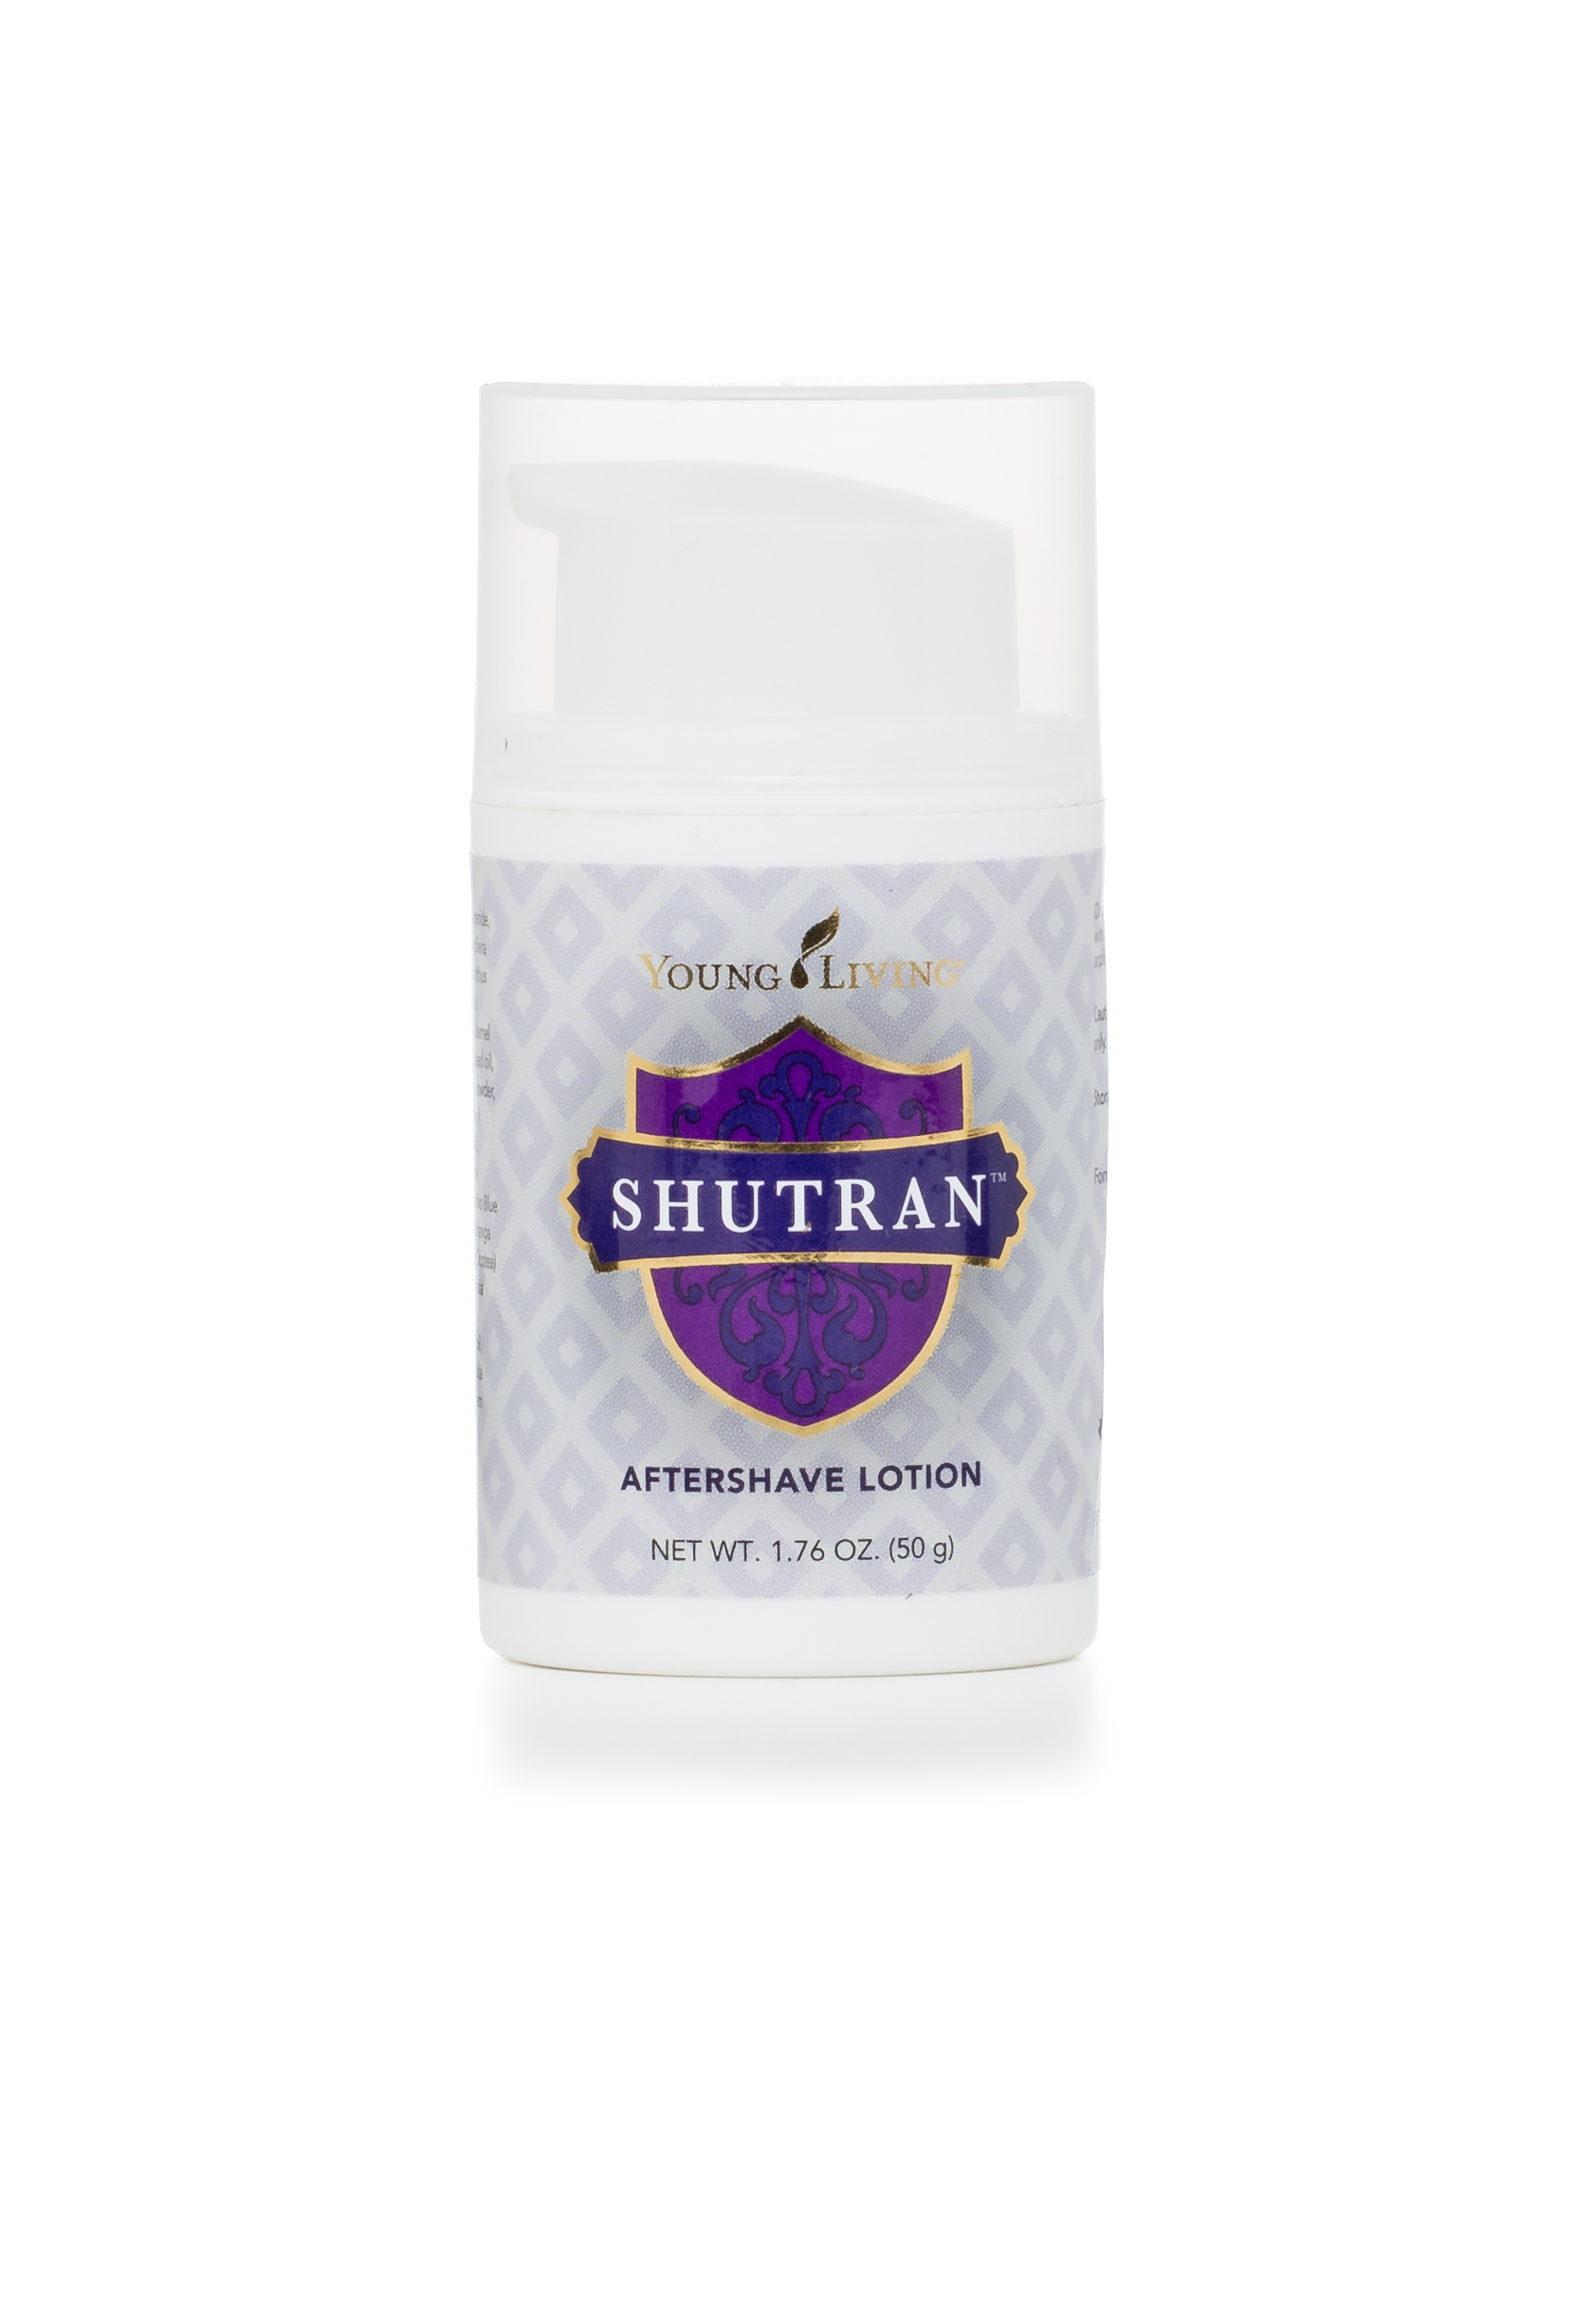 Shutran Aftershave Lotion 